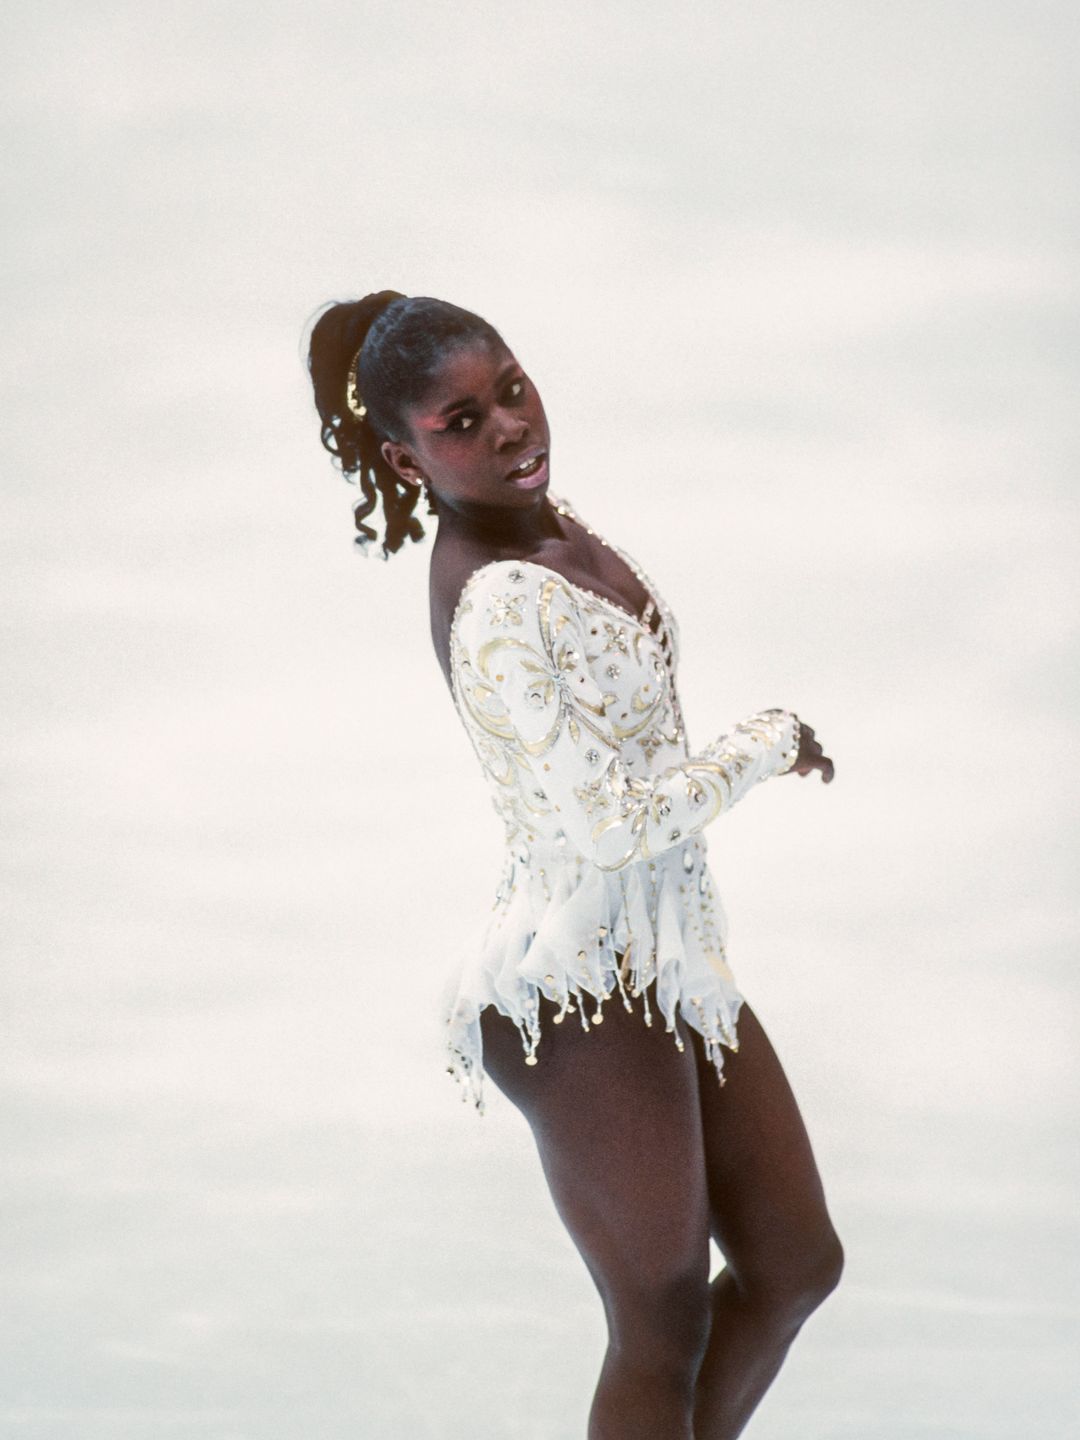 Surya Bonaly of France competes in the Free Skate portion of the Women's Figure Skating singles competition of the 1994 Winter Olympic Games